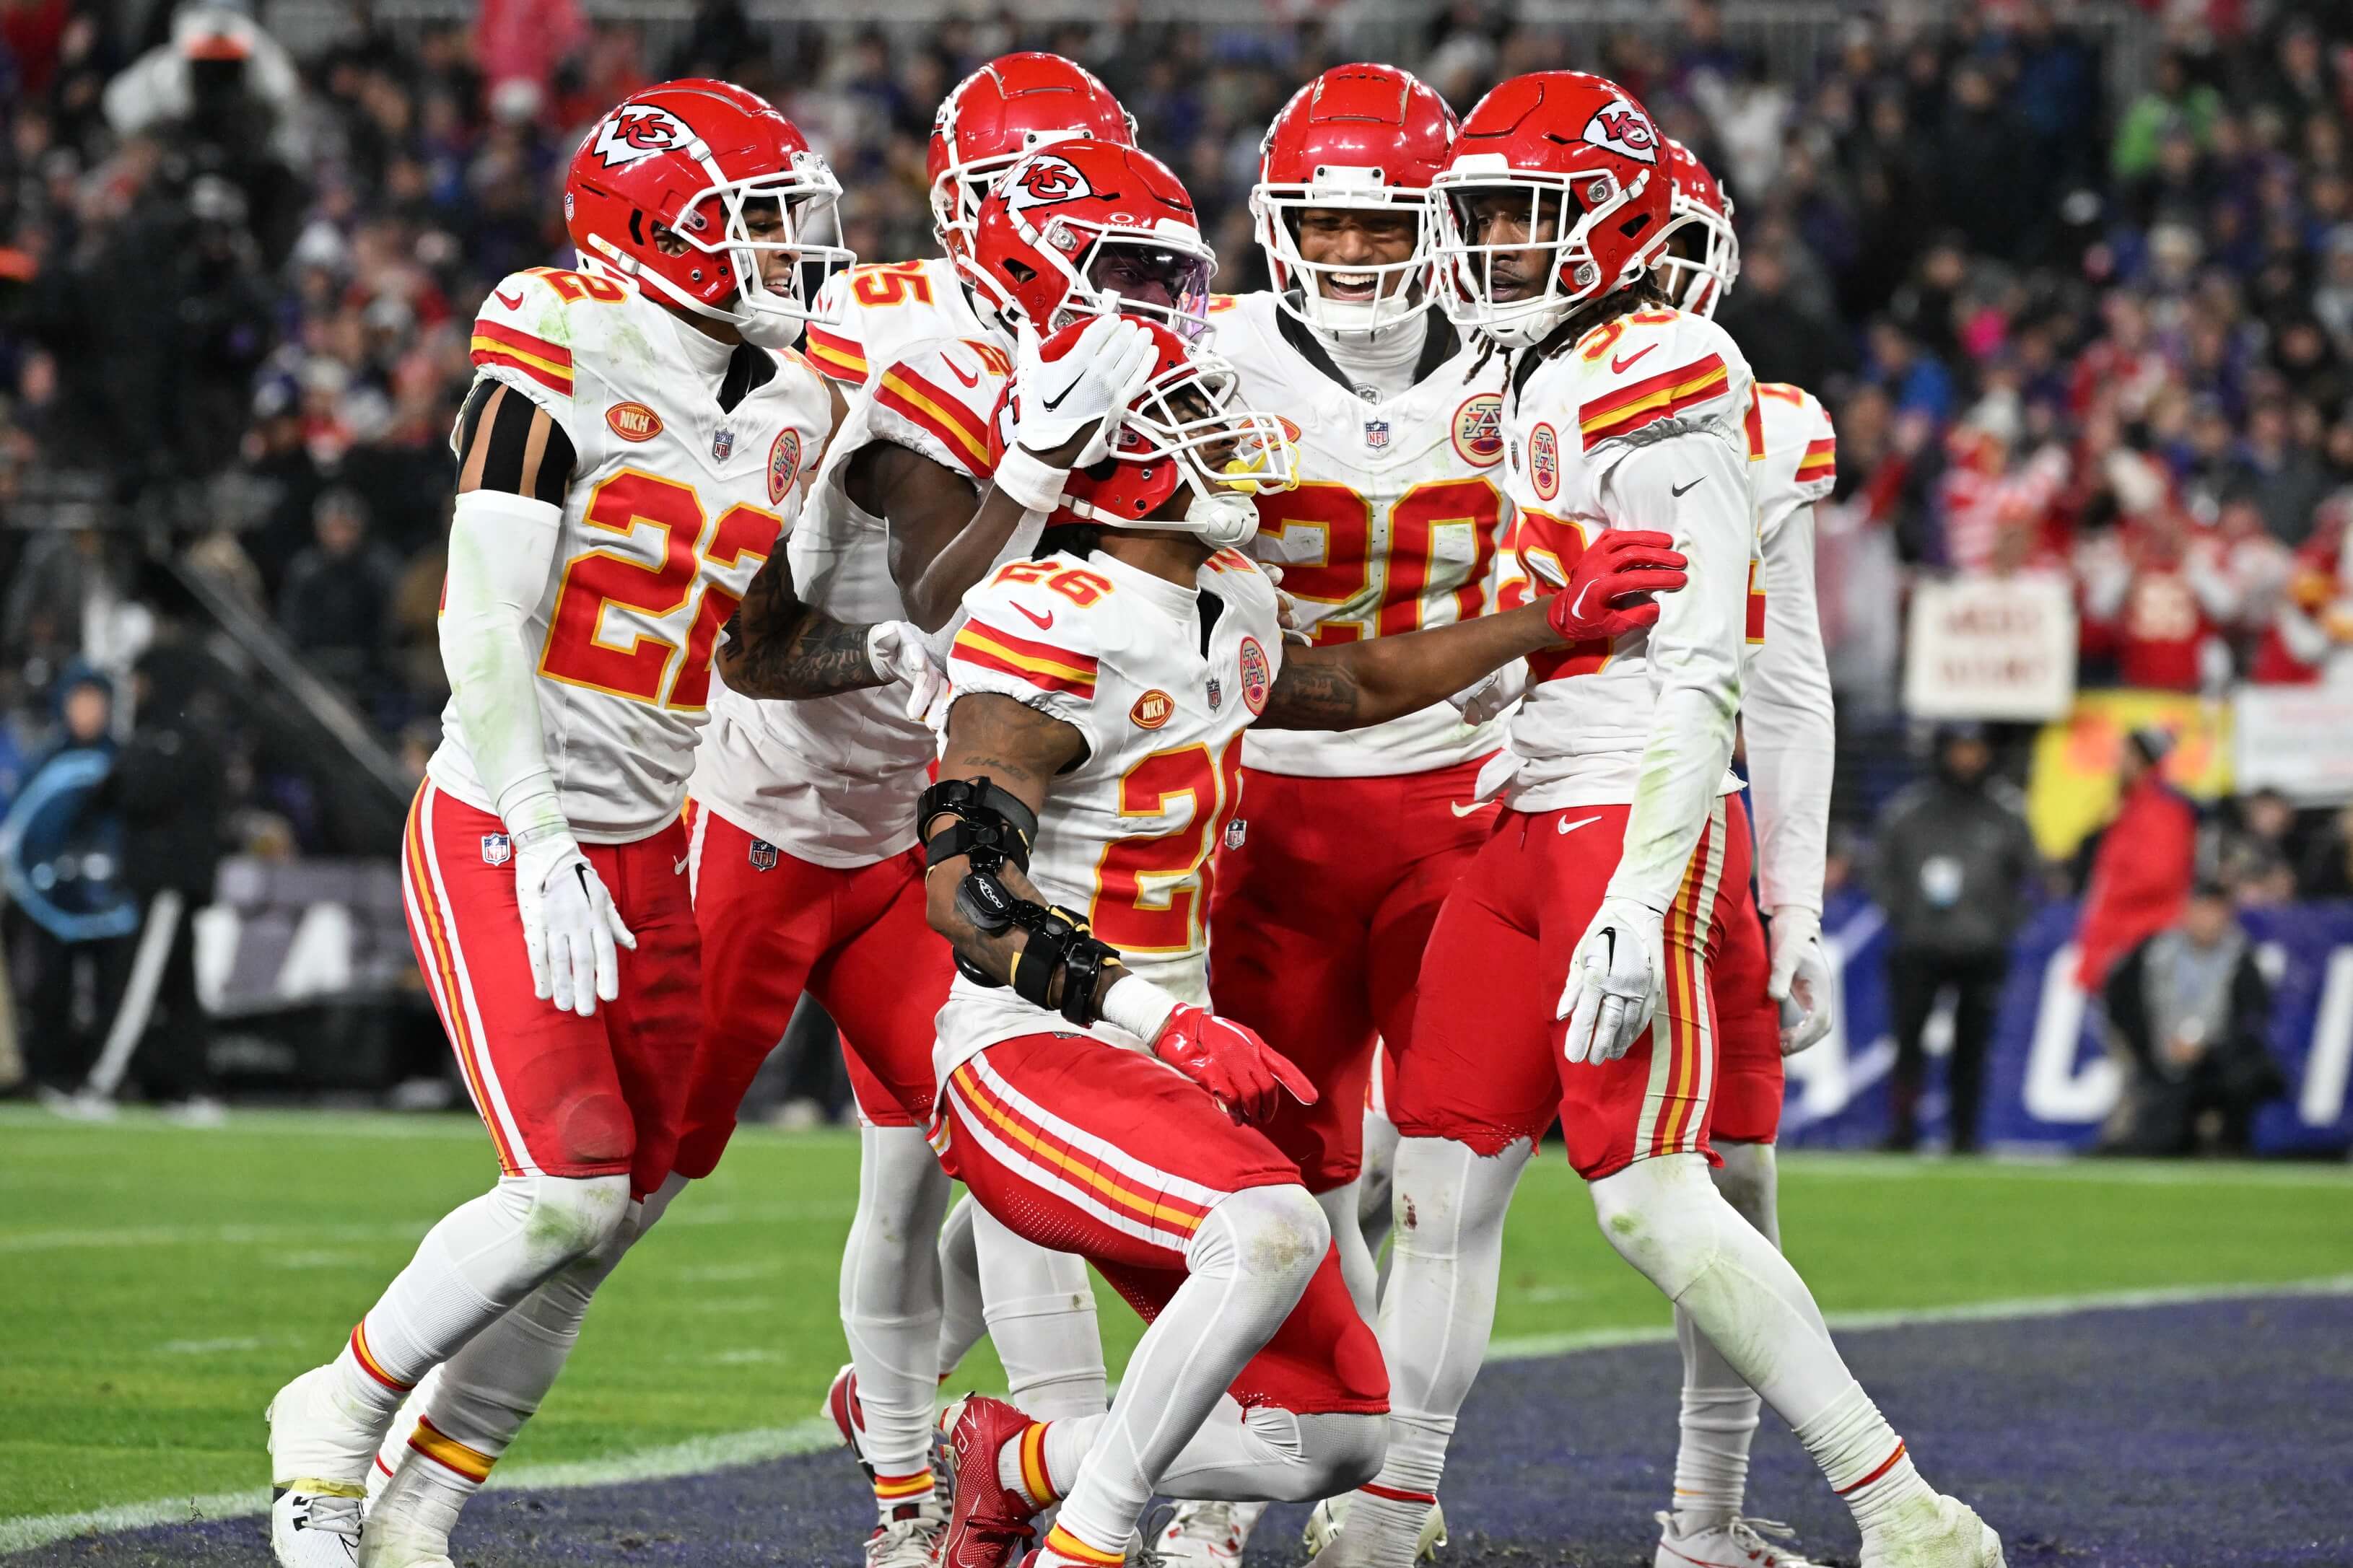 Kansas City Chiefs safety Deon Bush (26) celebrates with teammates after intercepting a pass in the end zone in the second half against the Baltimore Ravens in the AFC Championship football game at M&T Bank Stadium.